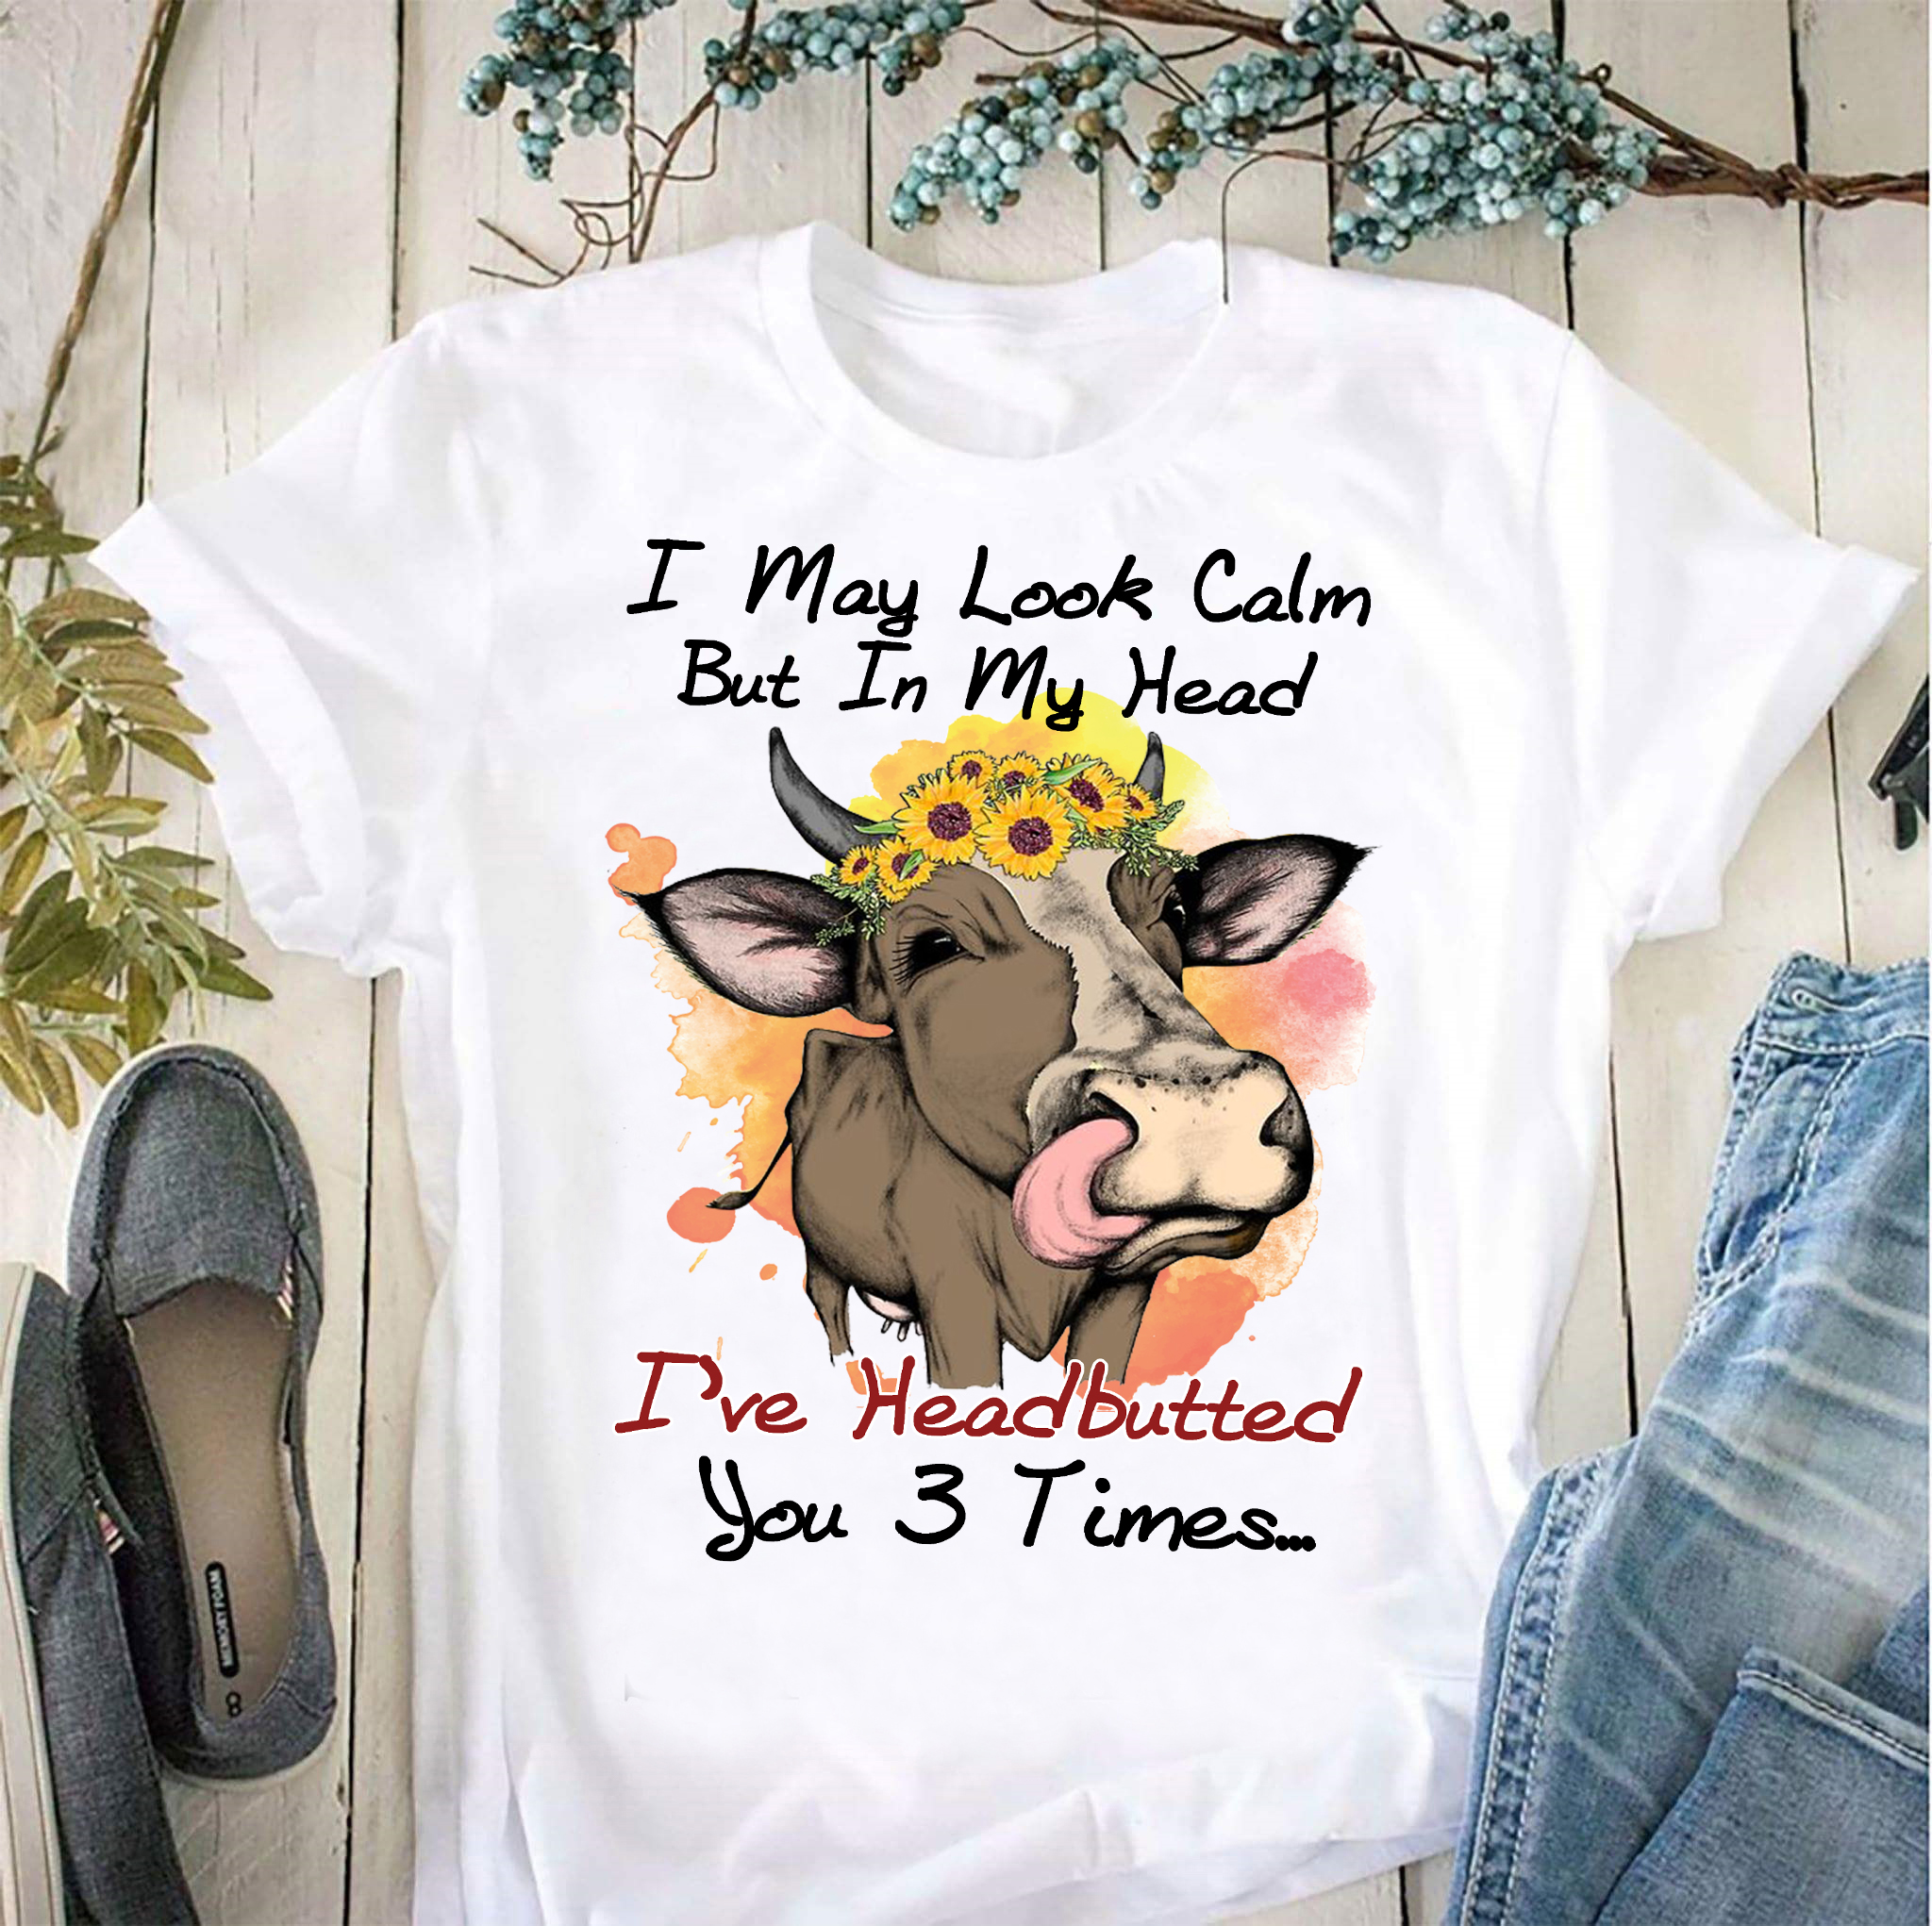 I may look calm but in my head I've headbutted you 3 times - Cows